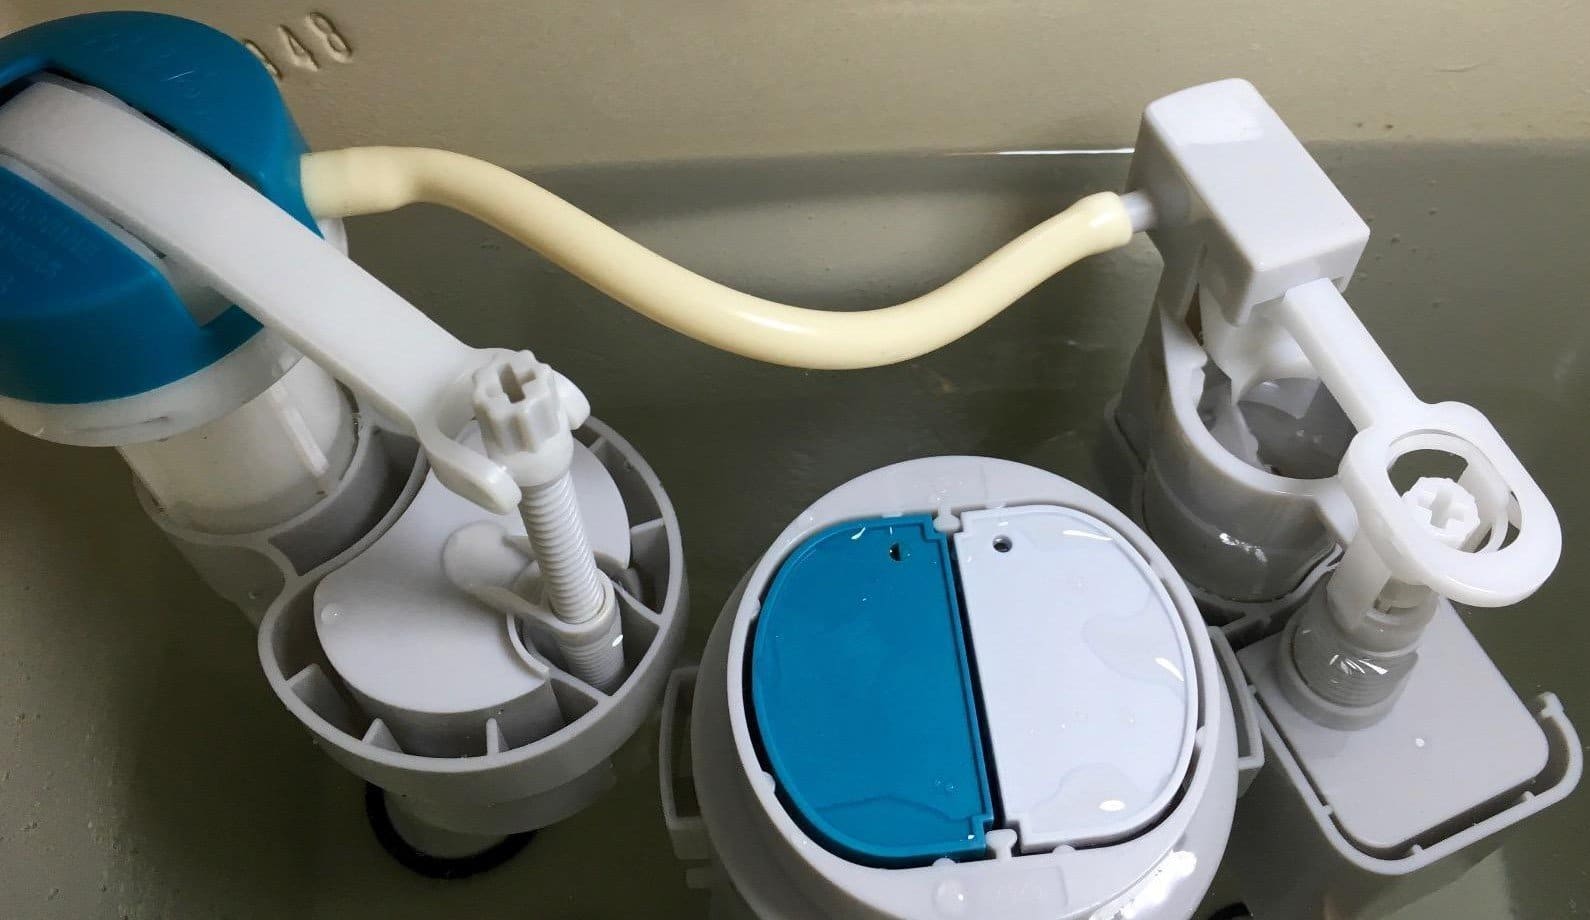 how-to-drain-a-toilet-clogged-overflowing-or-for-repairs-toilet-haven